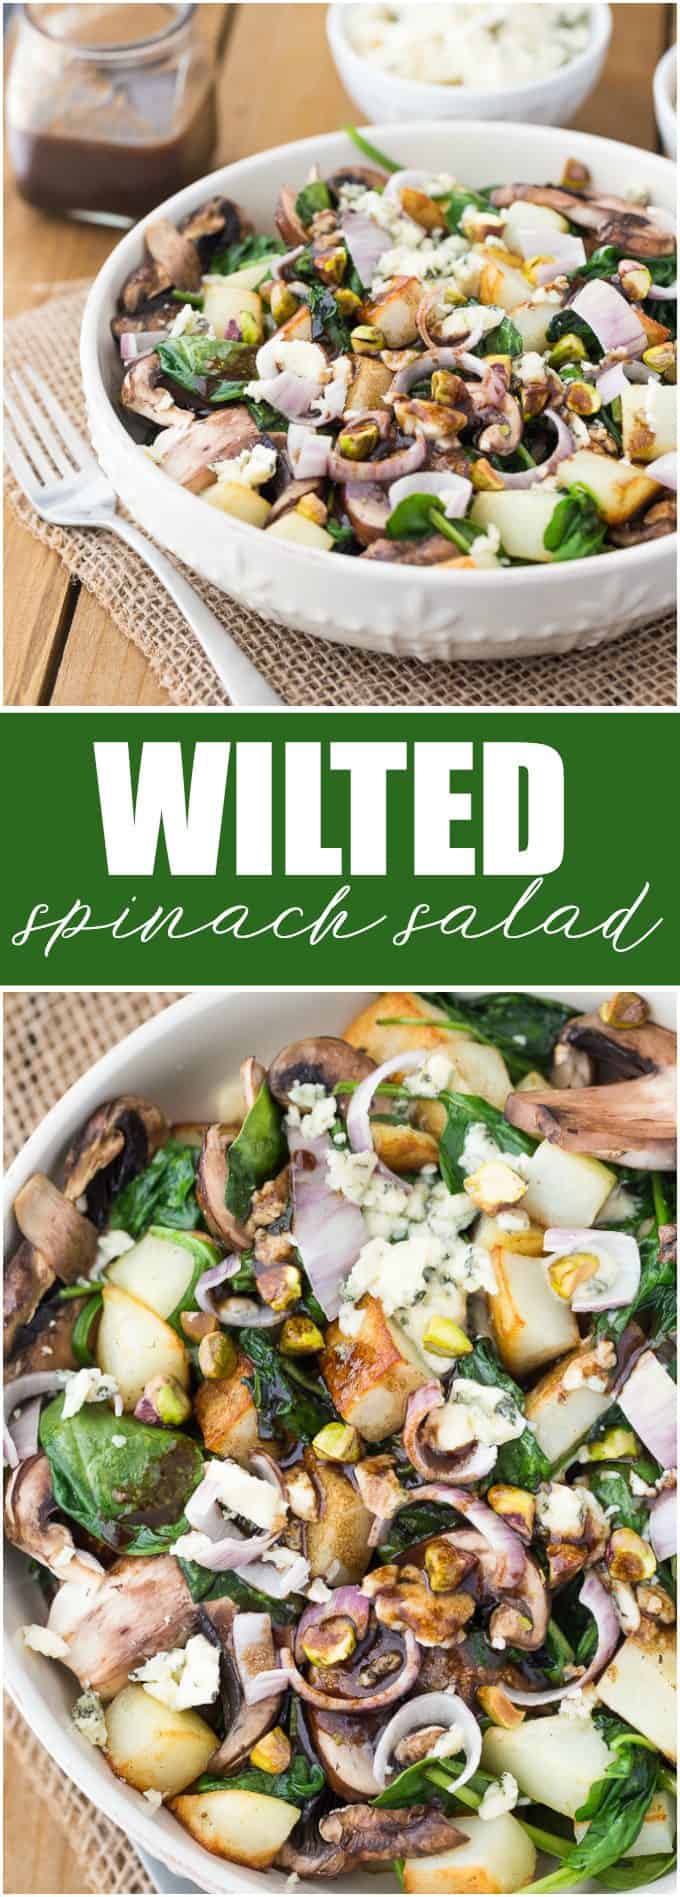 Wilted Spinach Salad - Crimini Mushrooms and Crispy Potato are topped on a bed of wilted spinach drenched with a raspberry balsamic dressing.